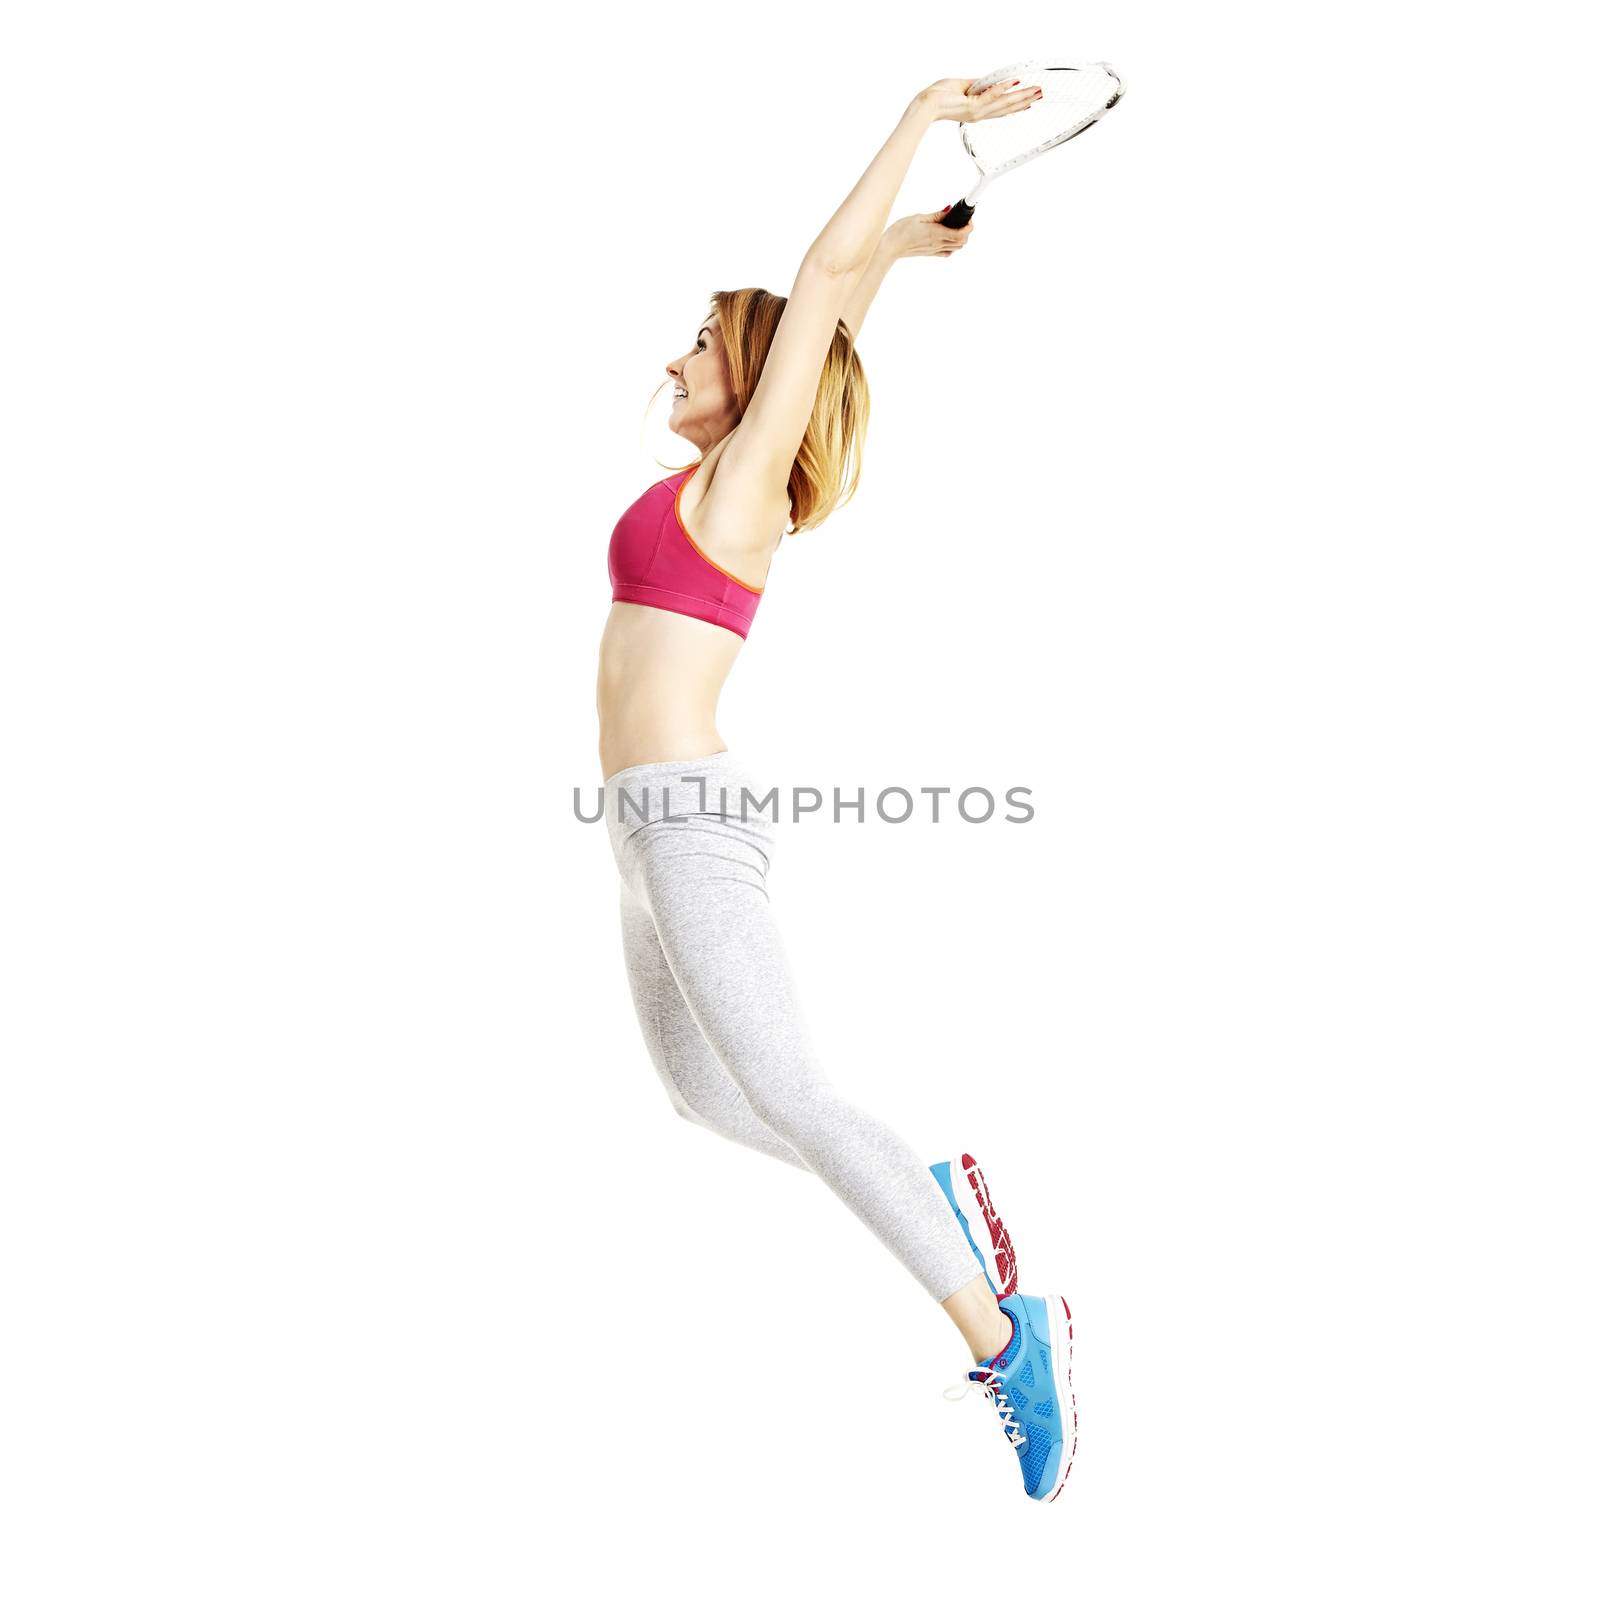 Sportswoman jumps up. She's on her tennis training. Studio shot isolated on white background.